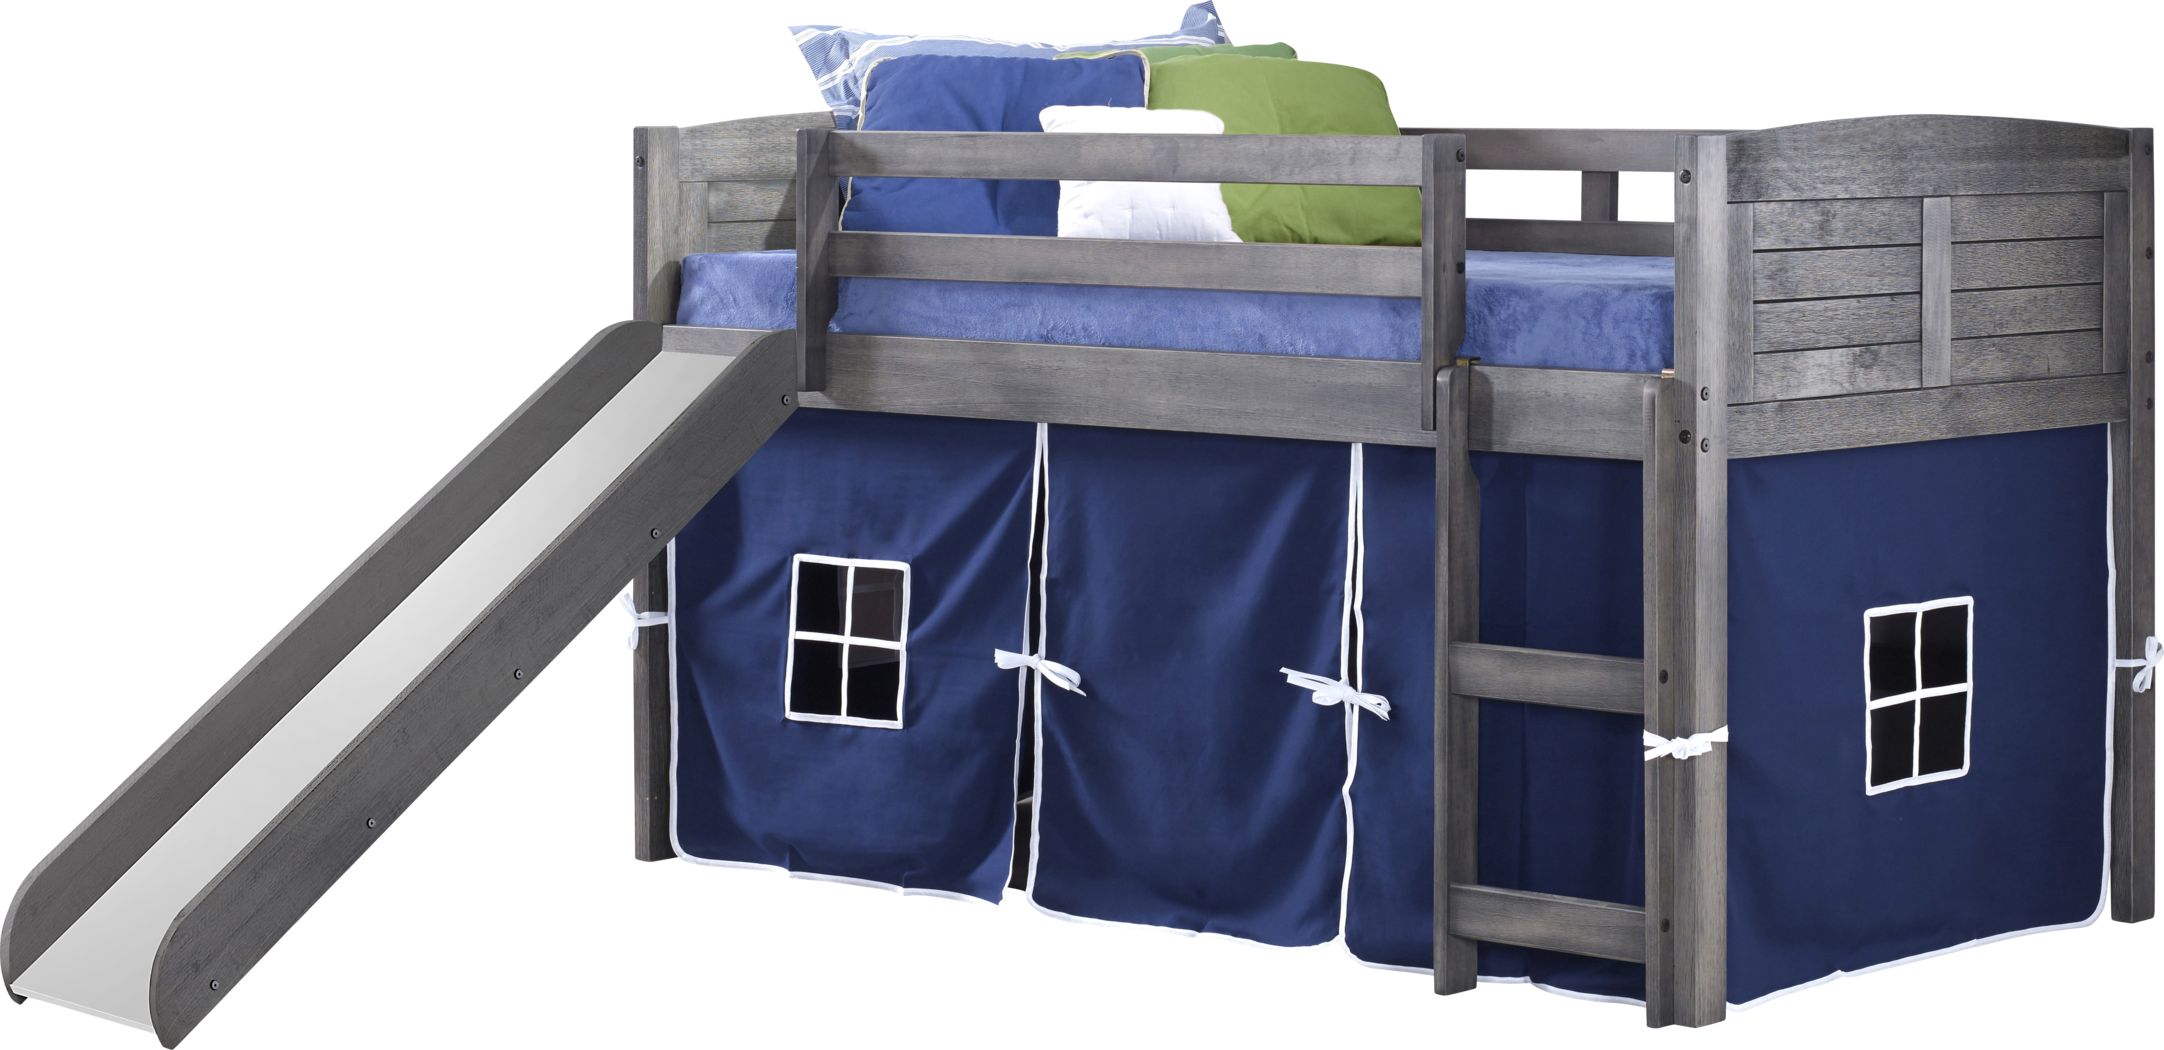 Bunk Beds For Kids, Bunk Bed With Play Area Underneath